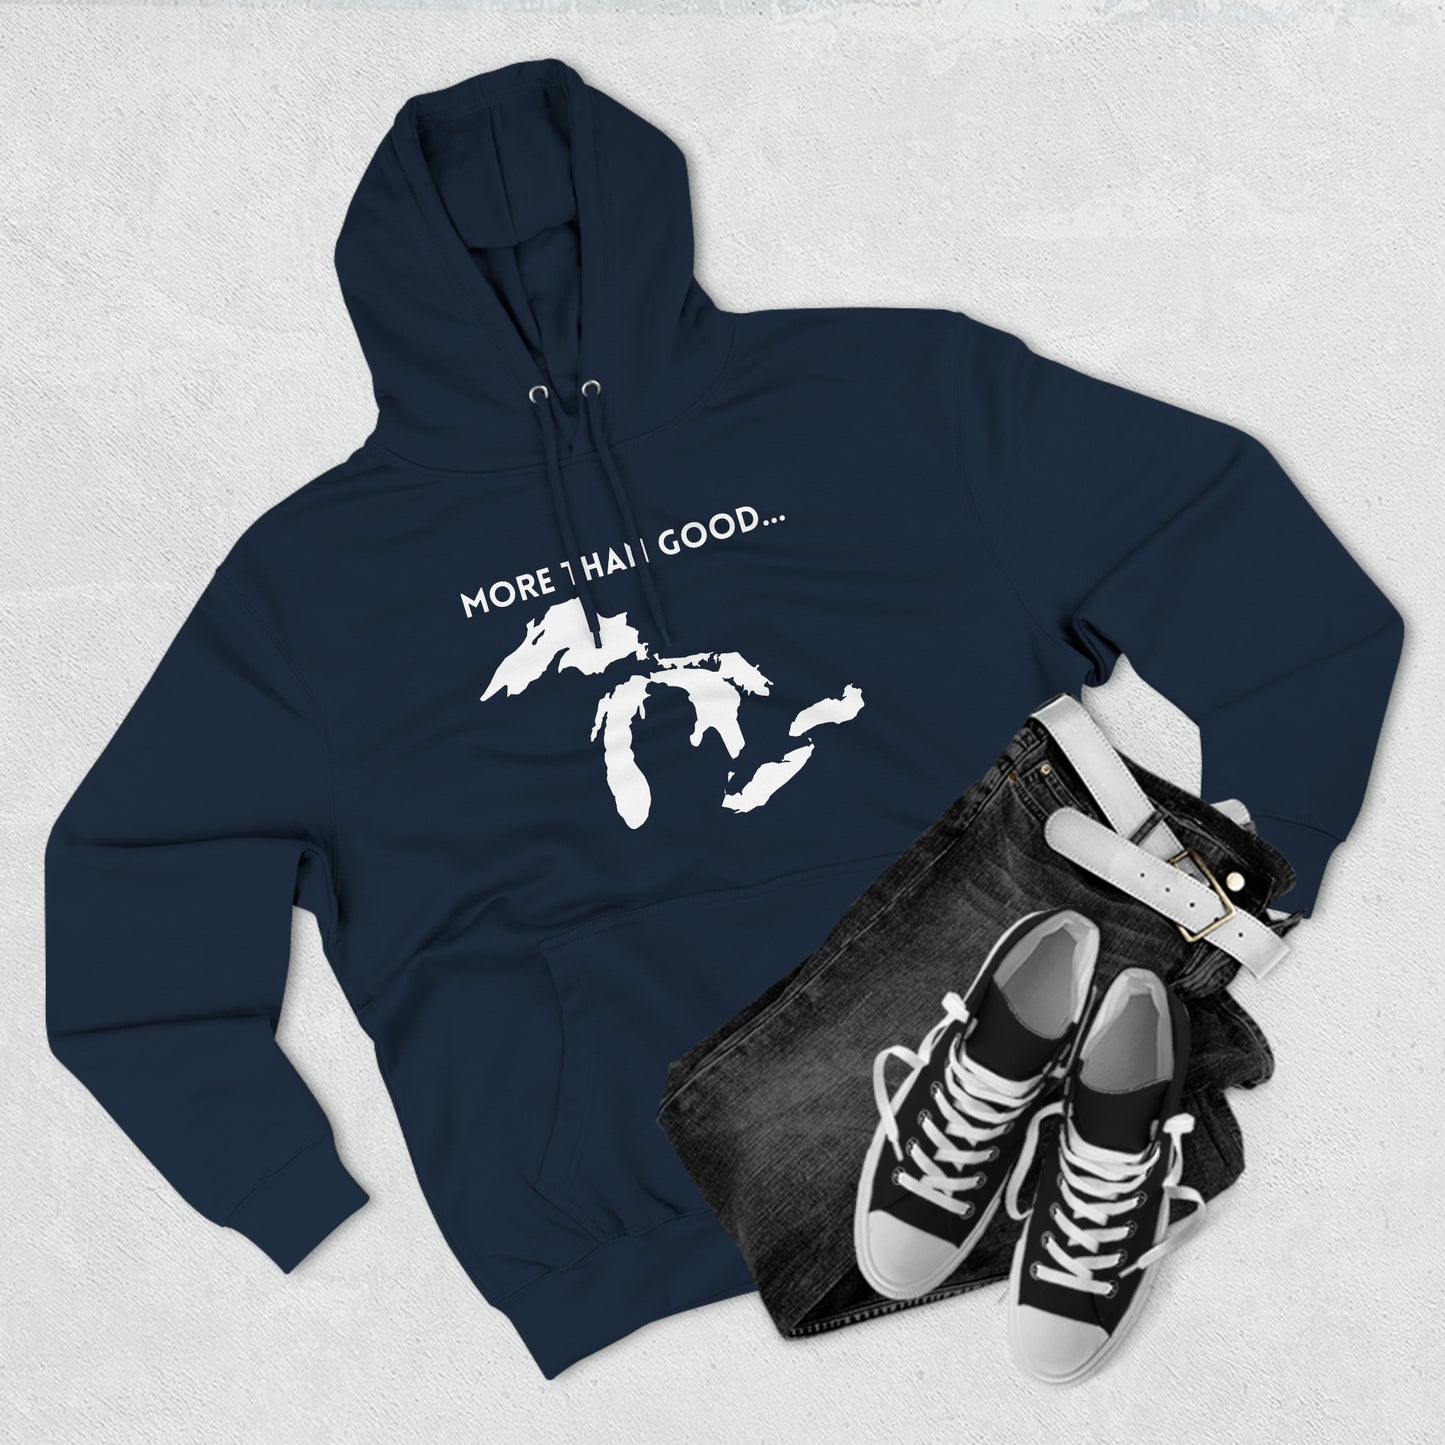 More Than Good... Great Lakes Premium Pullover Hoodie